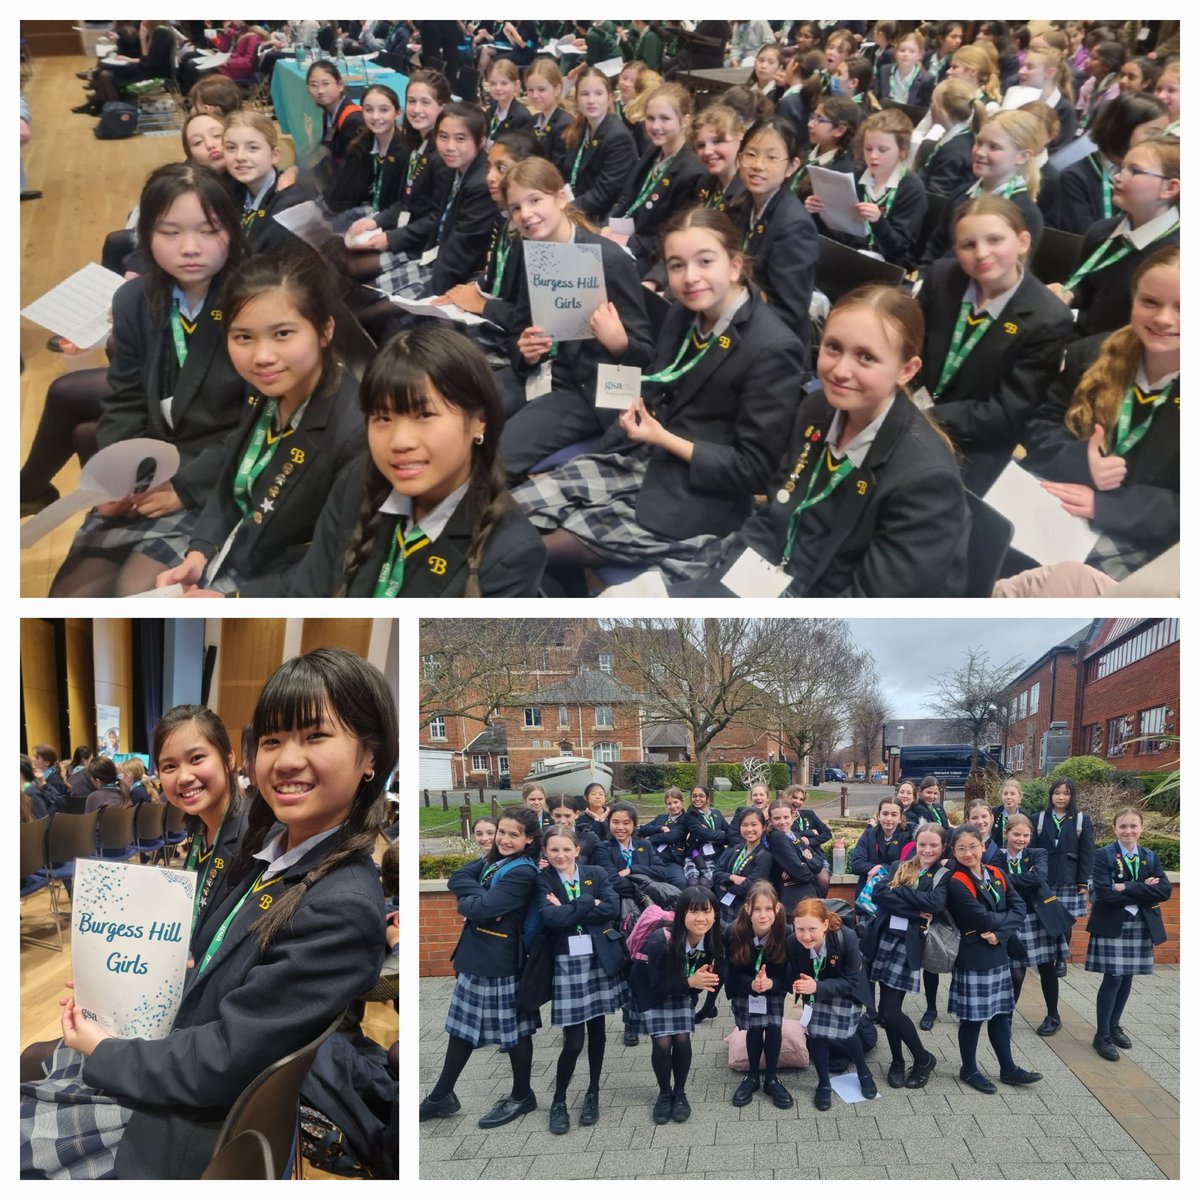 Great morning at the GSA Choir Competition Finals in Warwick 🎶💖 Fabulous singing and an amazing performance from our Year 7 & 8 Choir 🥰 Well done girls 👏🏼👏🏼👏🏼 This is ..... Why We Sing! 🎶 💜 Thank you for hosting #GSAChoirOfTheYear 😊 @GSAUK #GSAGoBold